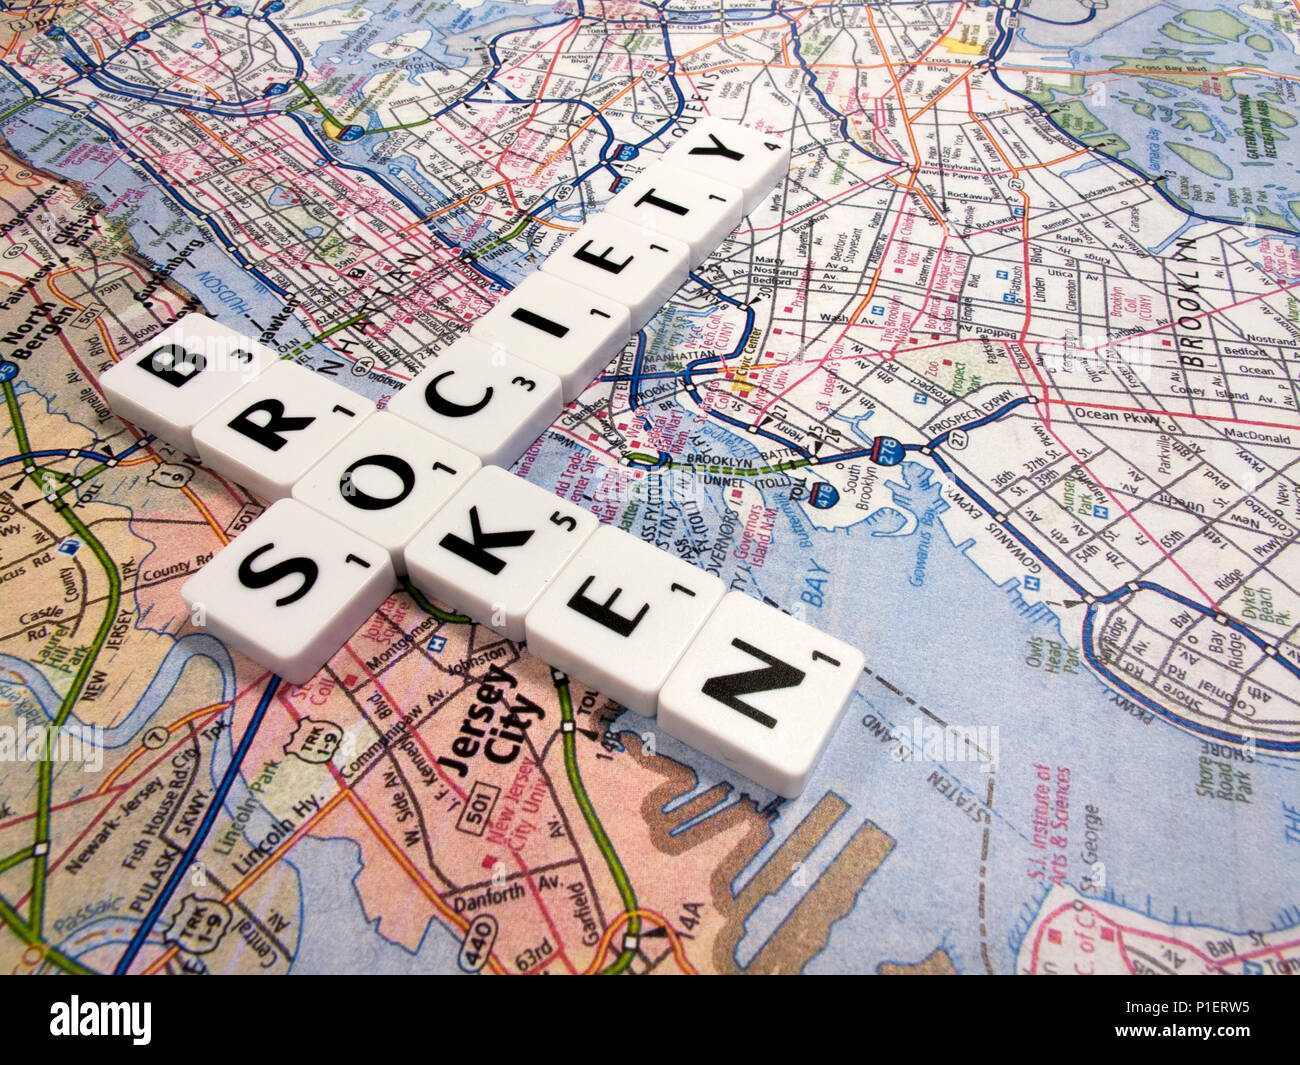 representation of broken society, a perceived or apparent general decline in moral values, with New York map background Stock Photo